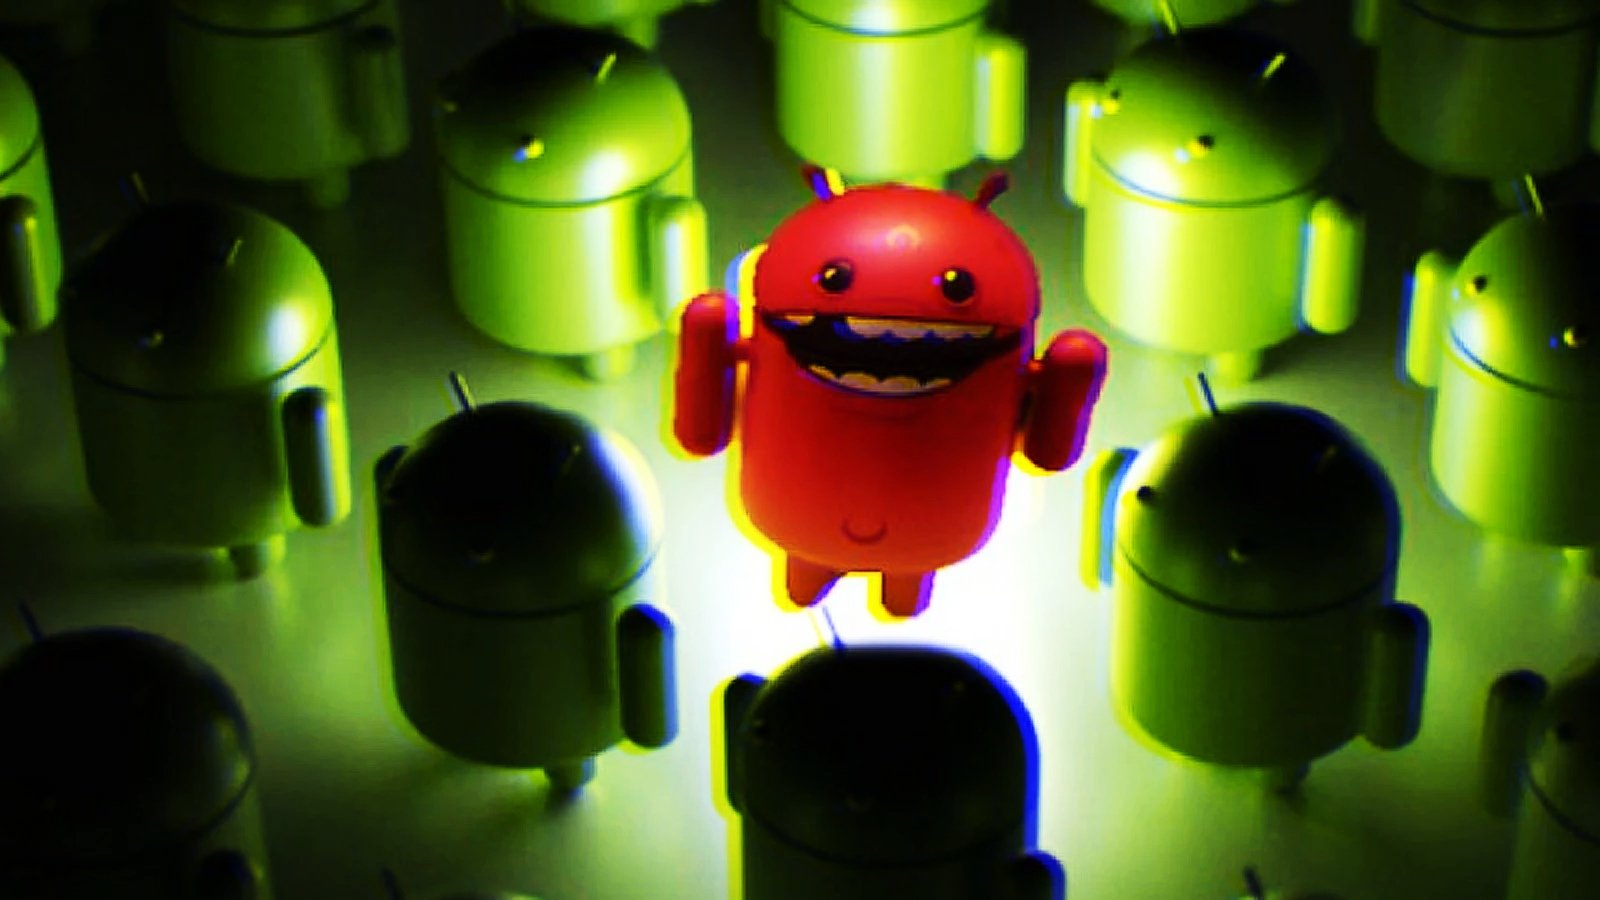 Fleckpe Android Malware Sneaks onto Google Play Store with Over 620,000 Downloads